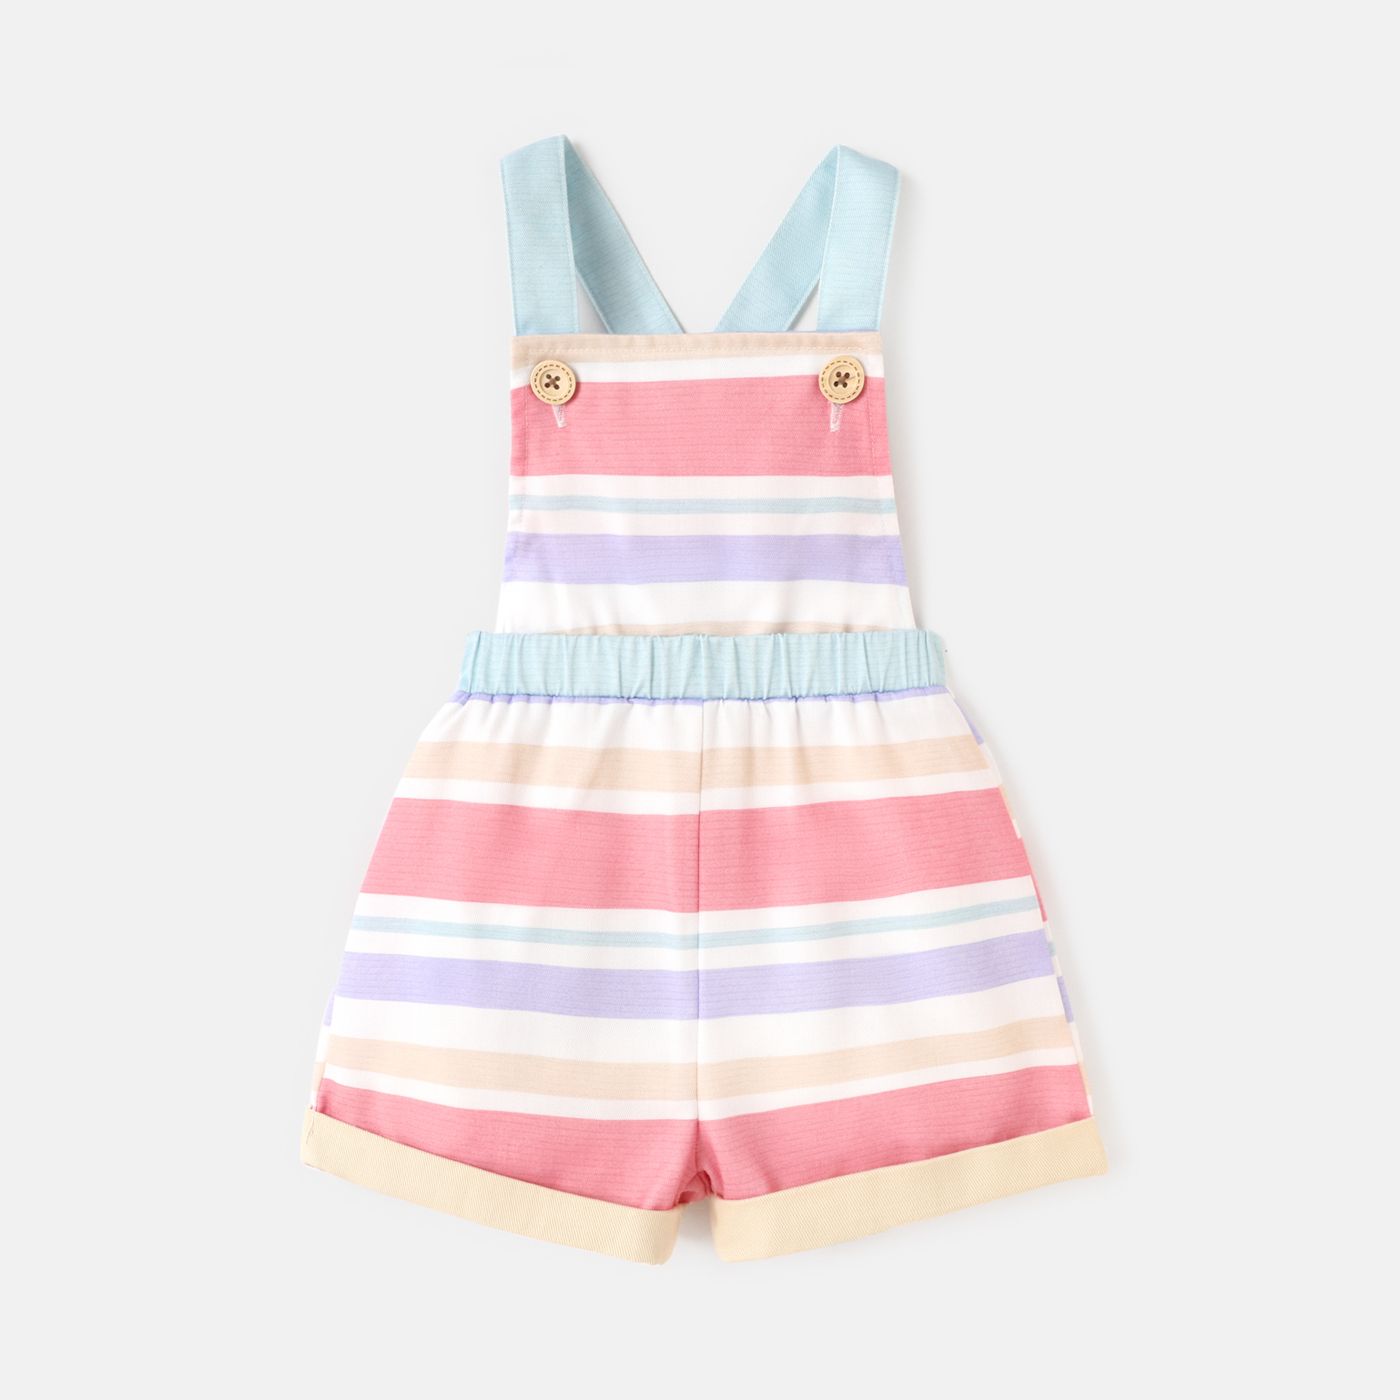 

Baby Girl Cotton Rabbit Embroidered Flutter-sleeve Tee or Colorful Striped Overalls Shorts